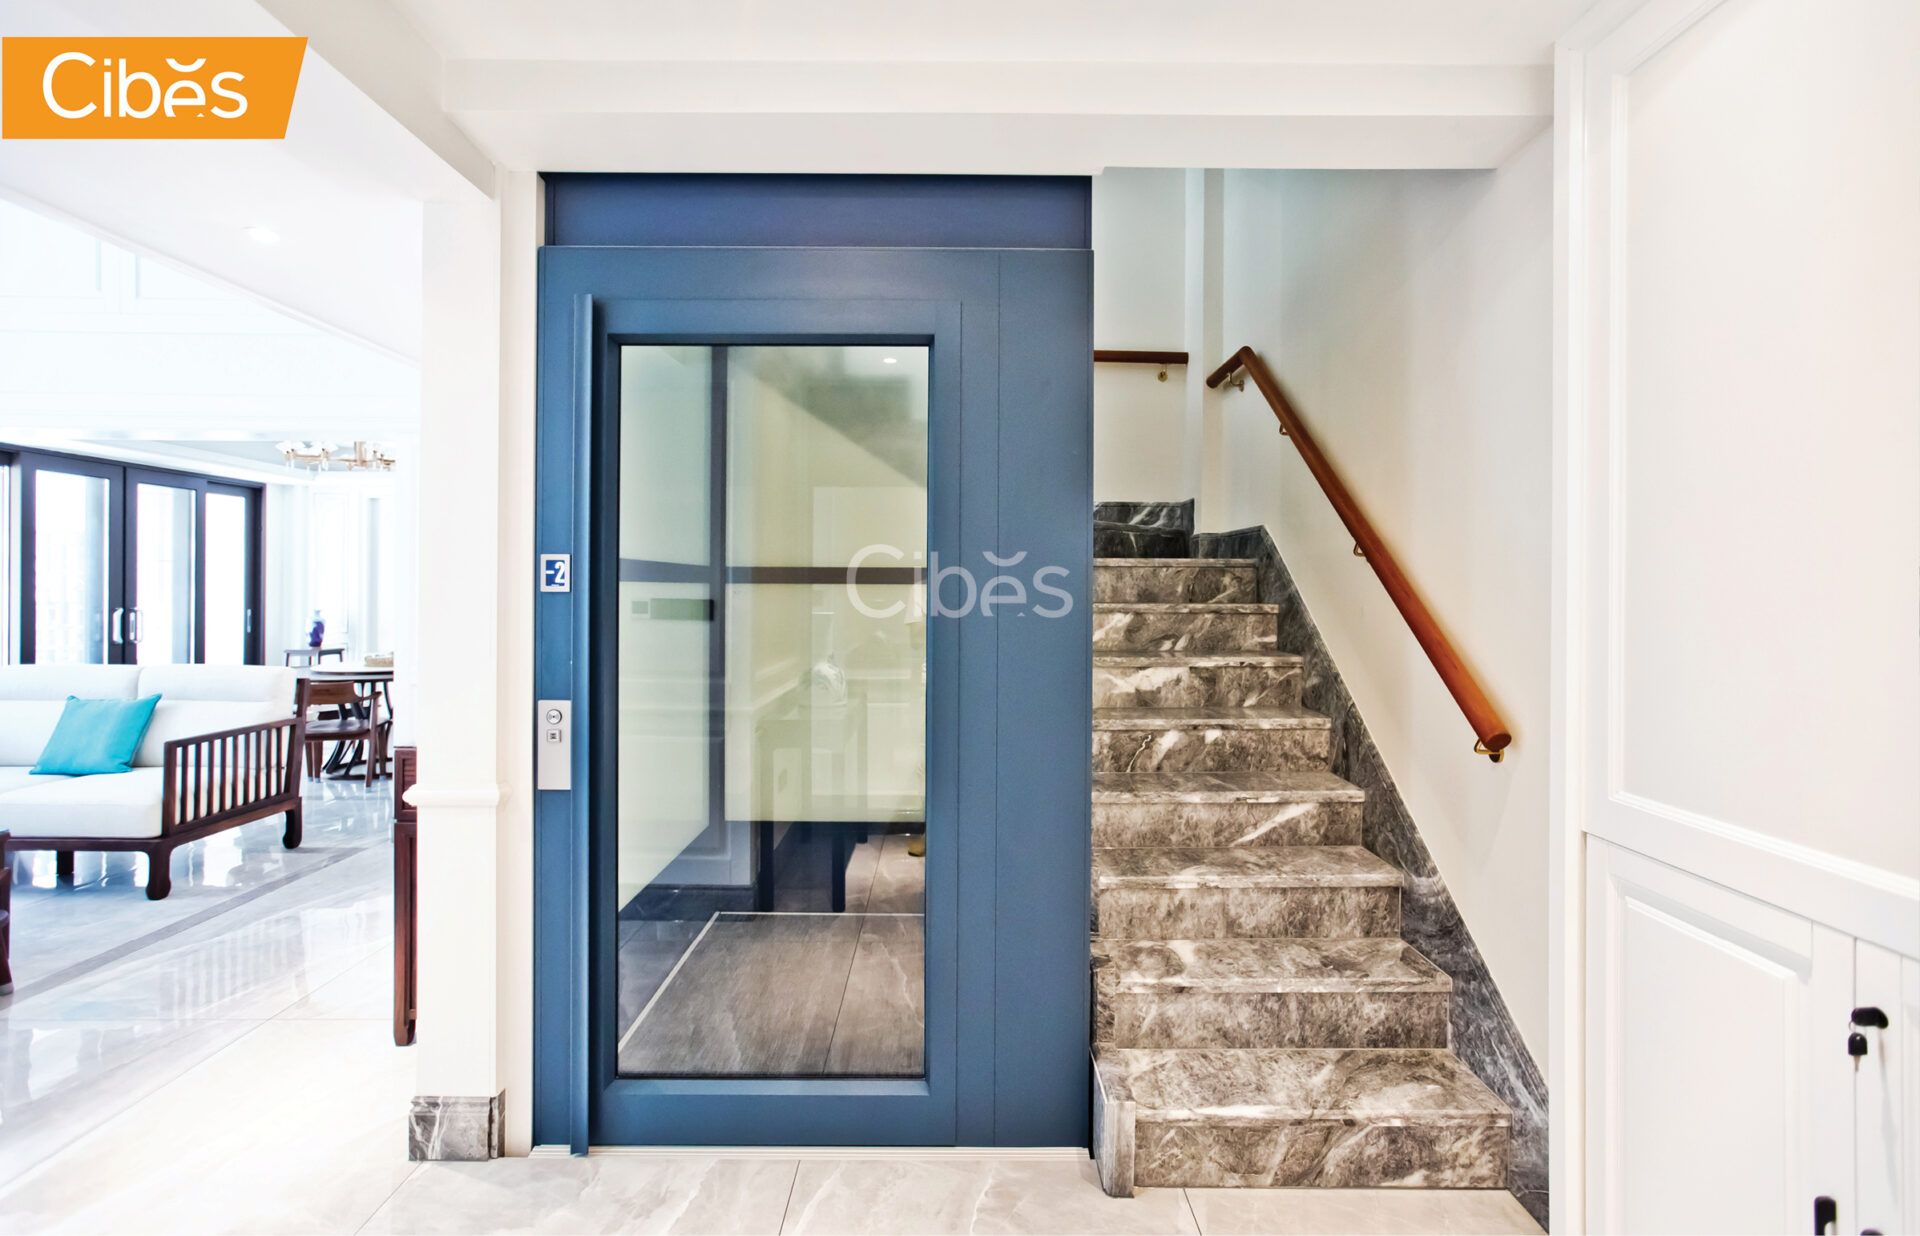 HOME LIFTS – Middle of stairs clas10